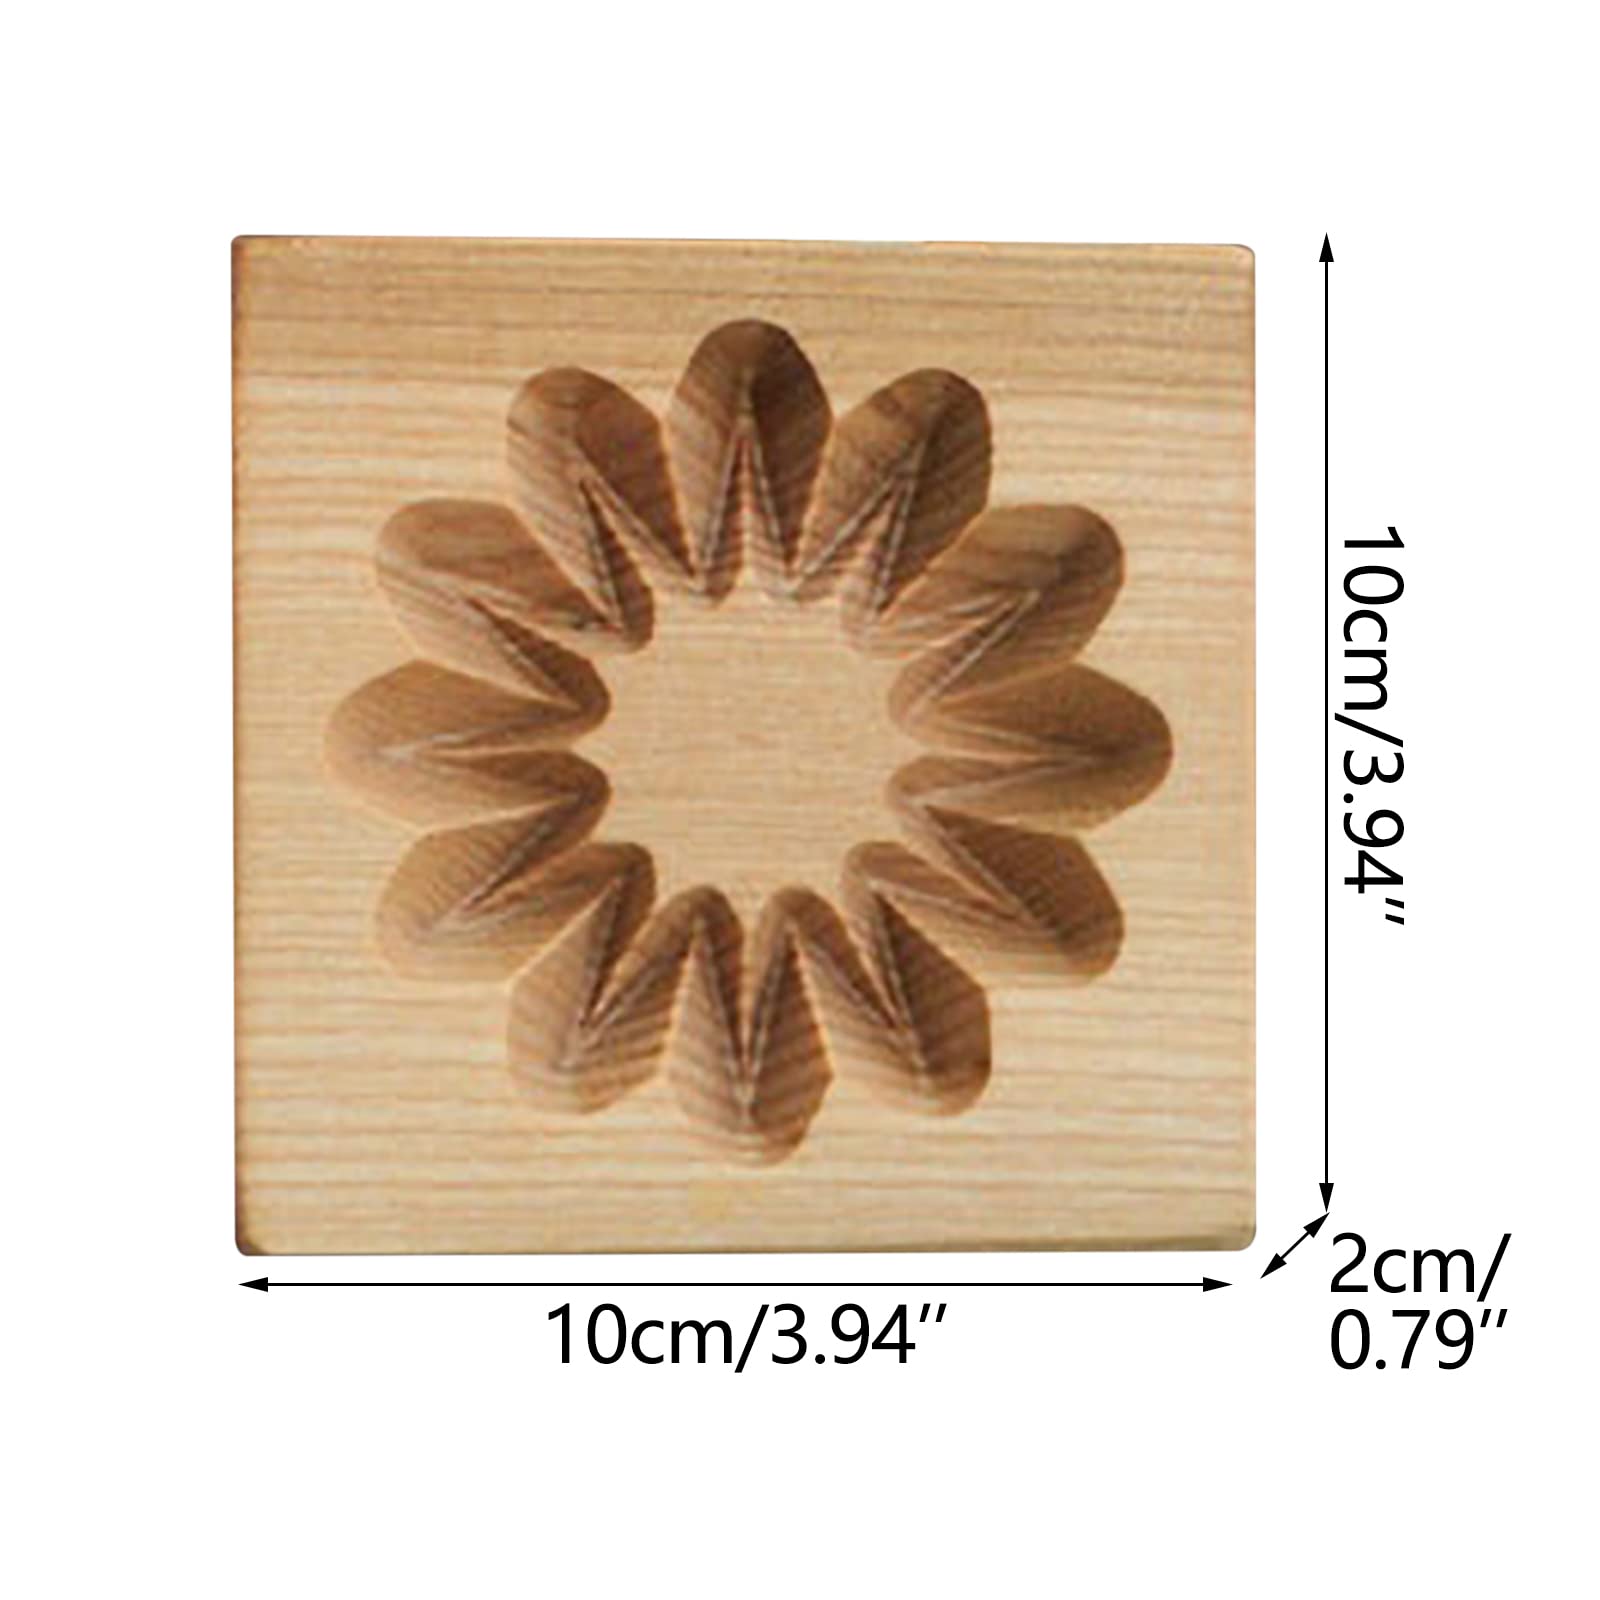 Wooden Cookie Biscuit Mold, 3D Baking Mold, Embossing Craft Decorating Baking Tool, Suitable for Halloween Thanksgiving Christmas Kitchen DIY (Shape D 10 * 10 * 2)